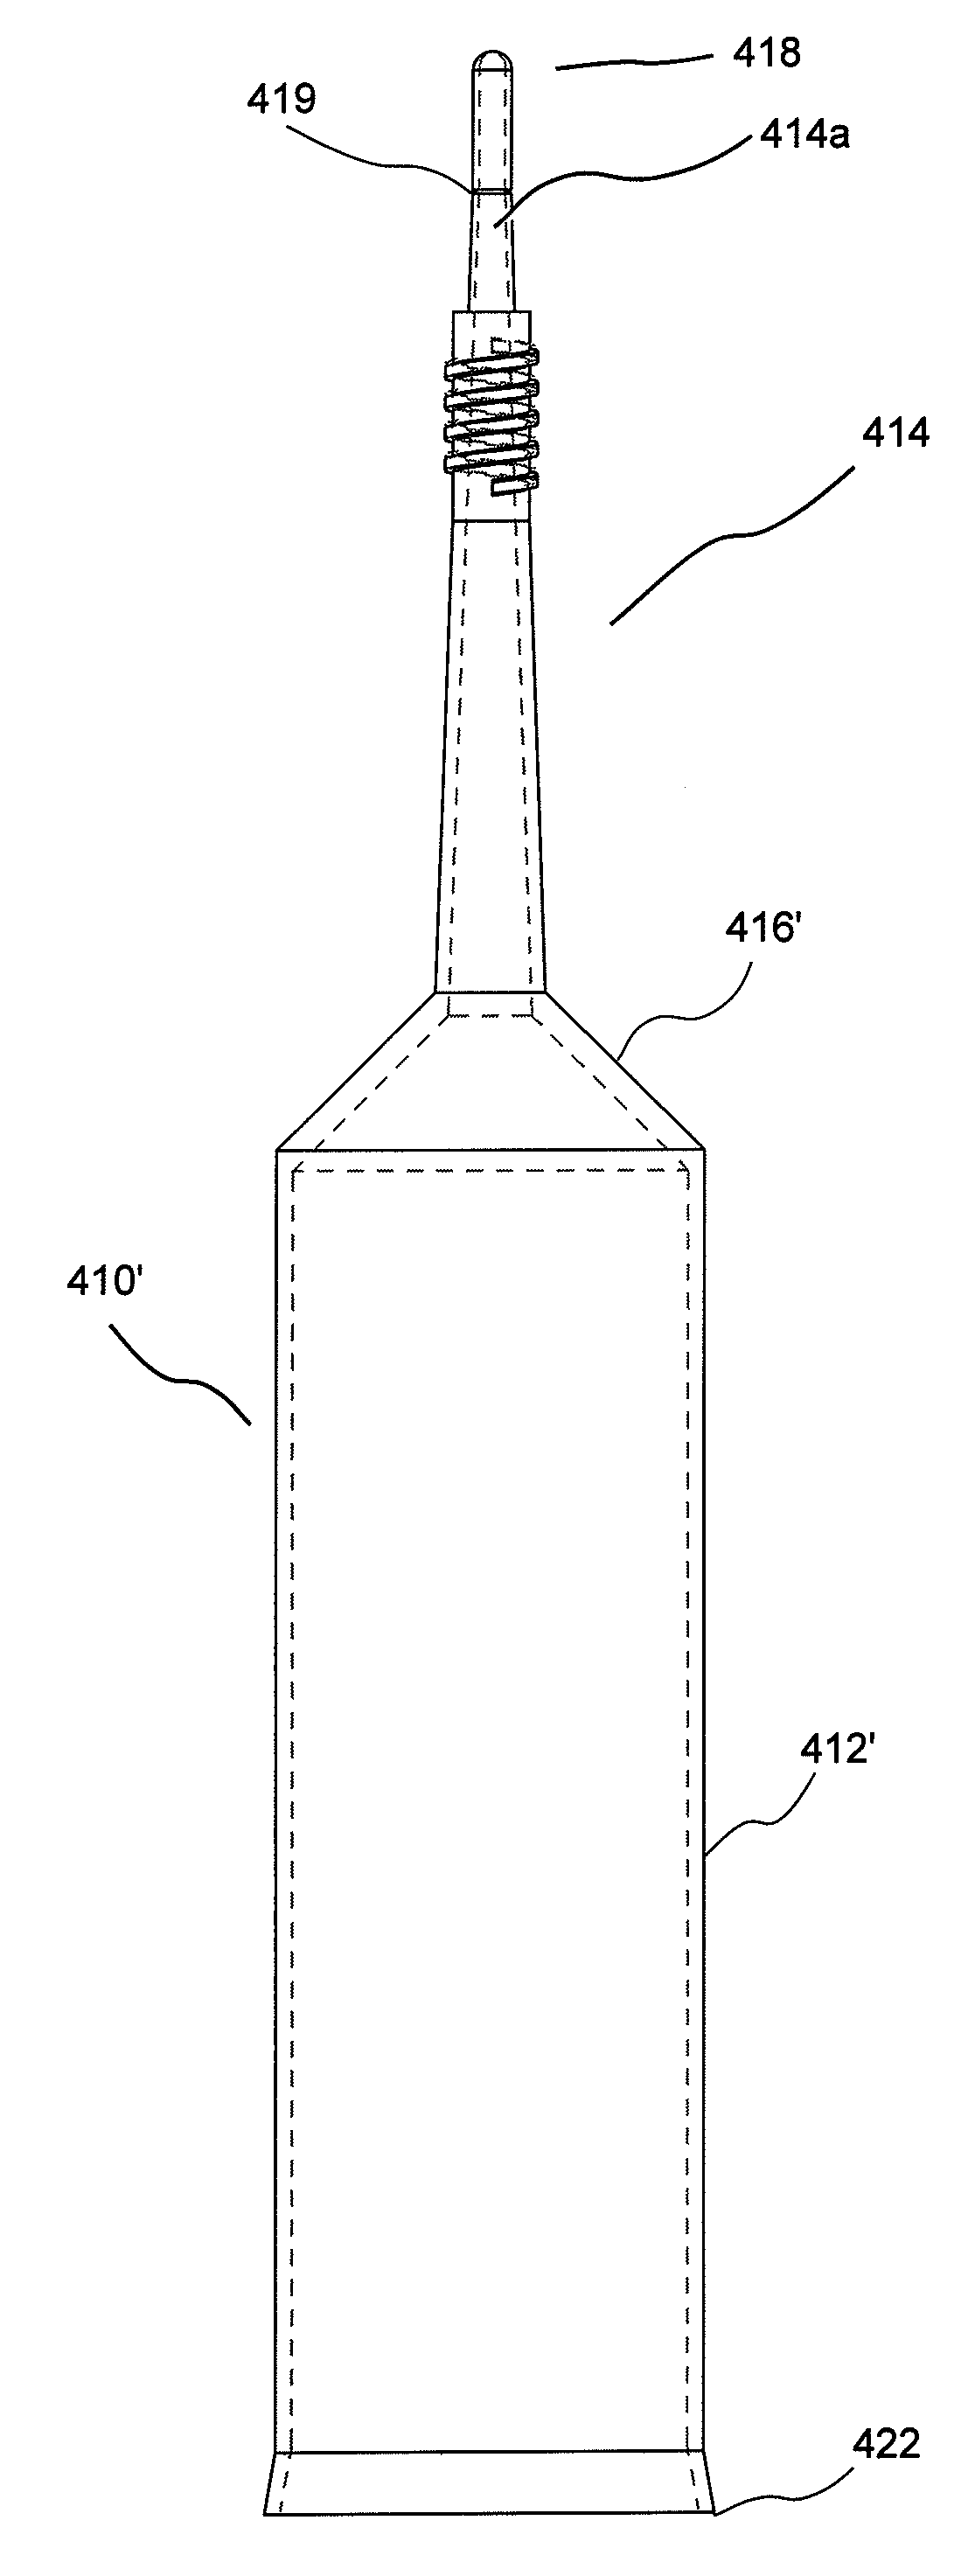 Syringe for use with injectors and methods of manufacturing syringes and other devices